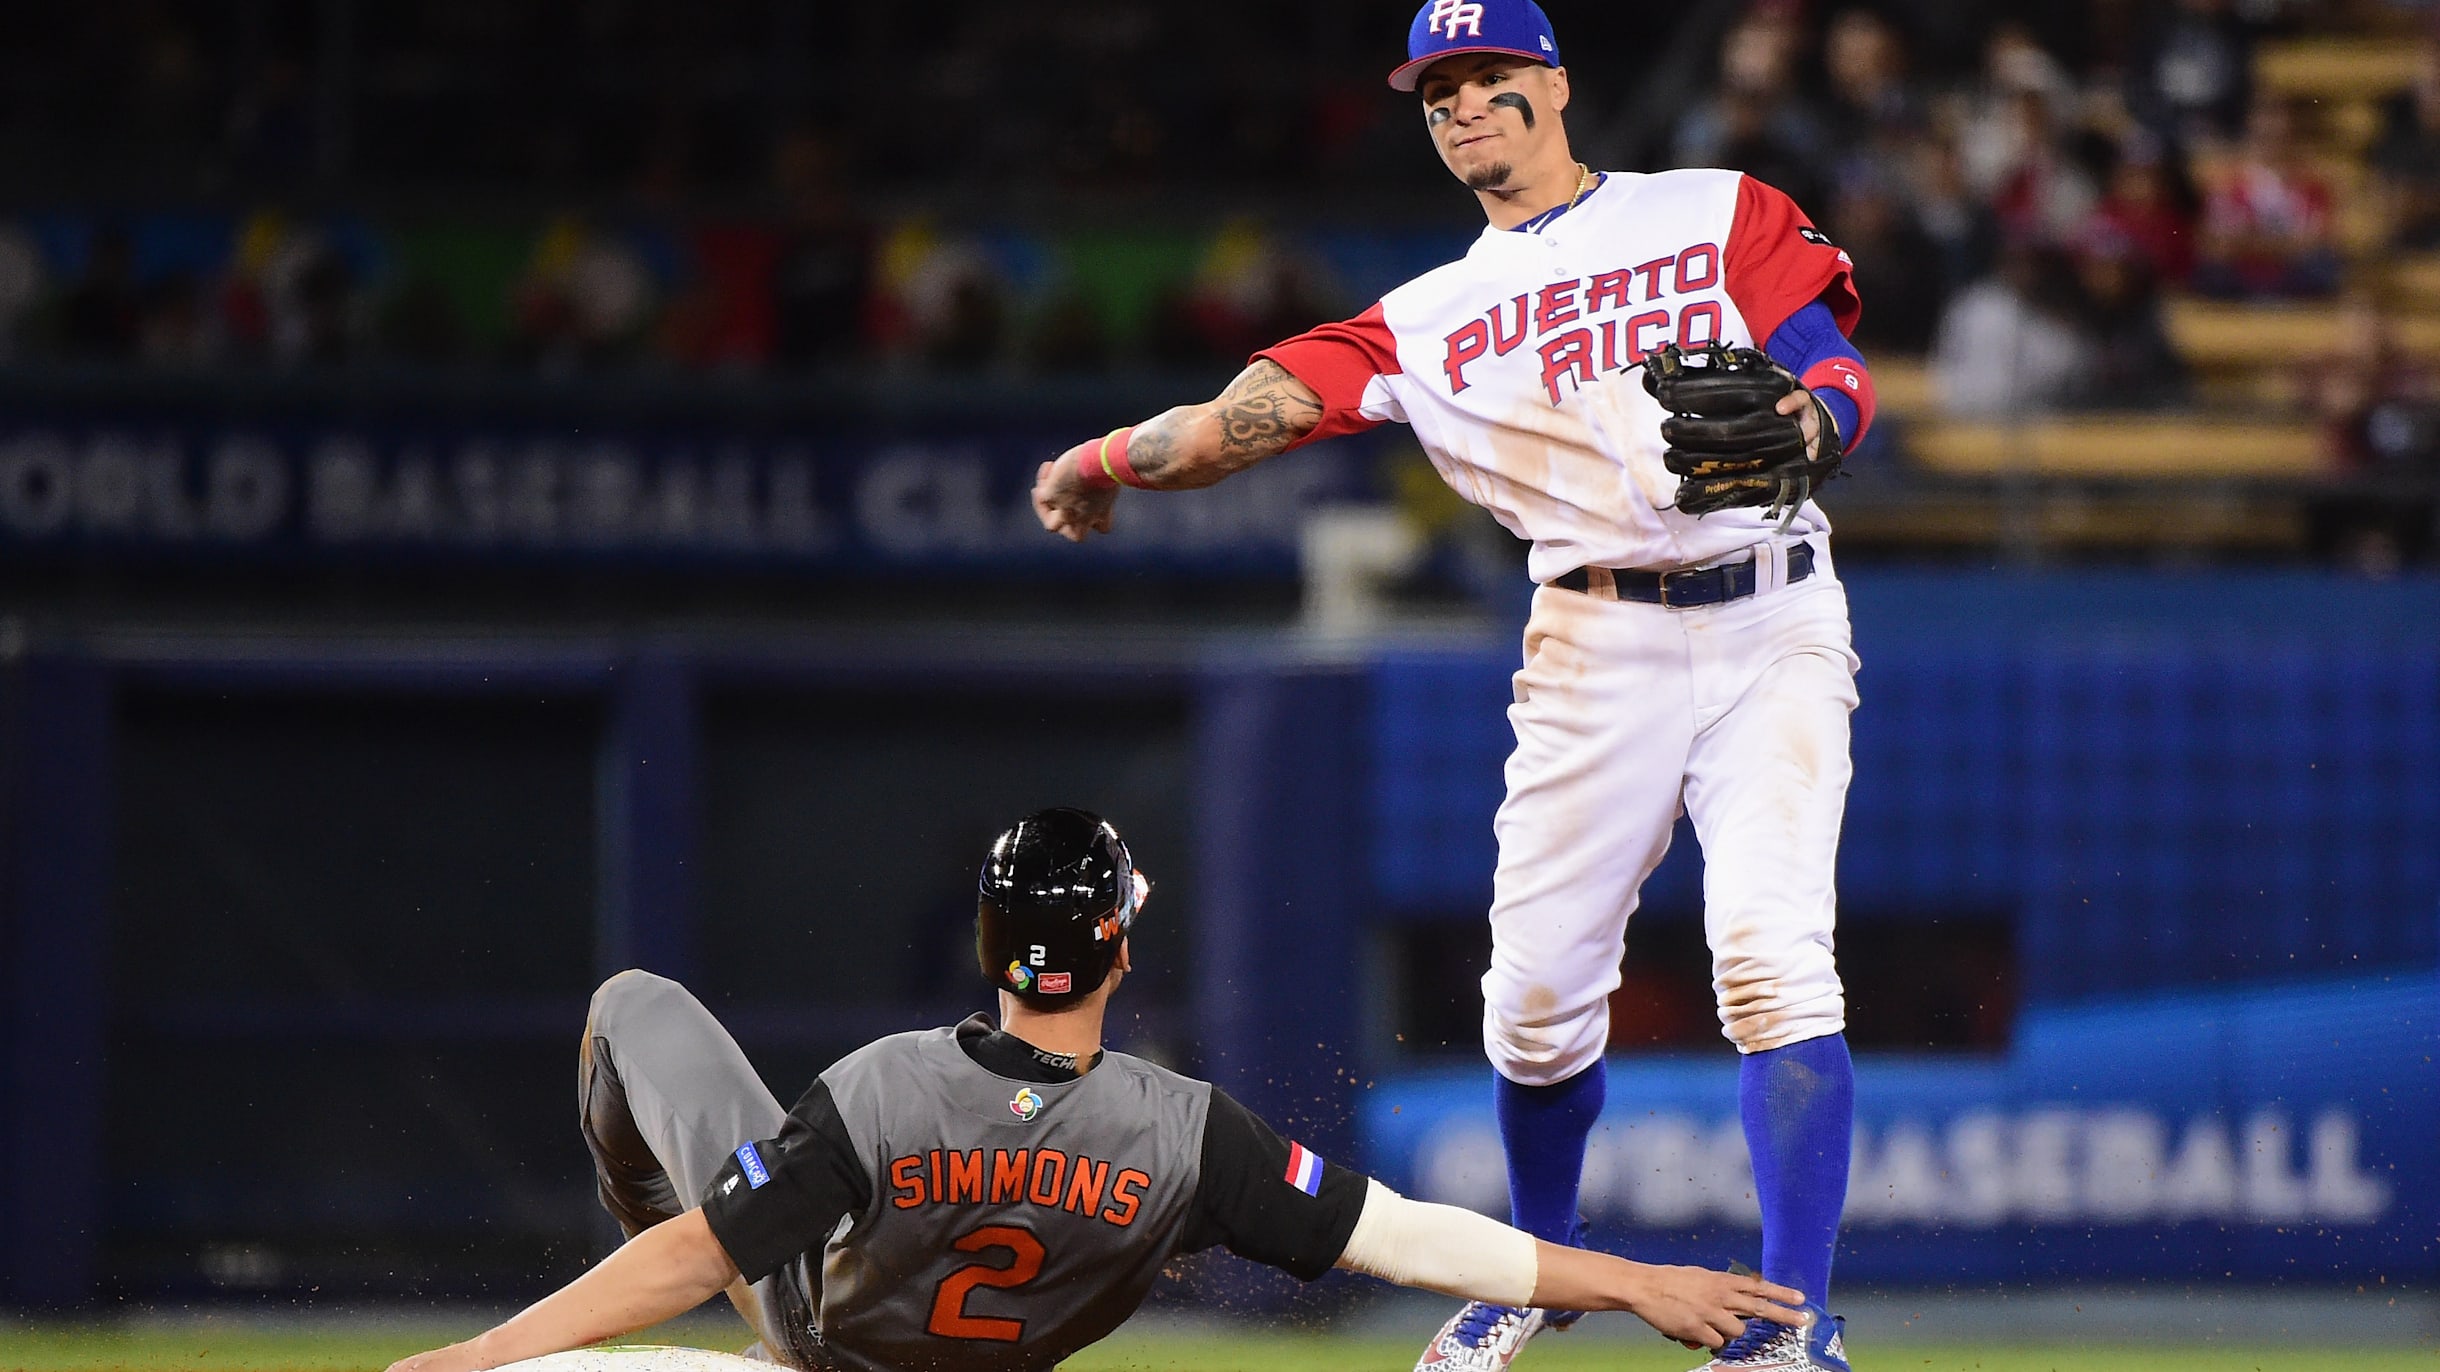 World Baseball Classic 2023 All team rosters and managers